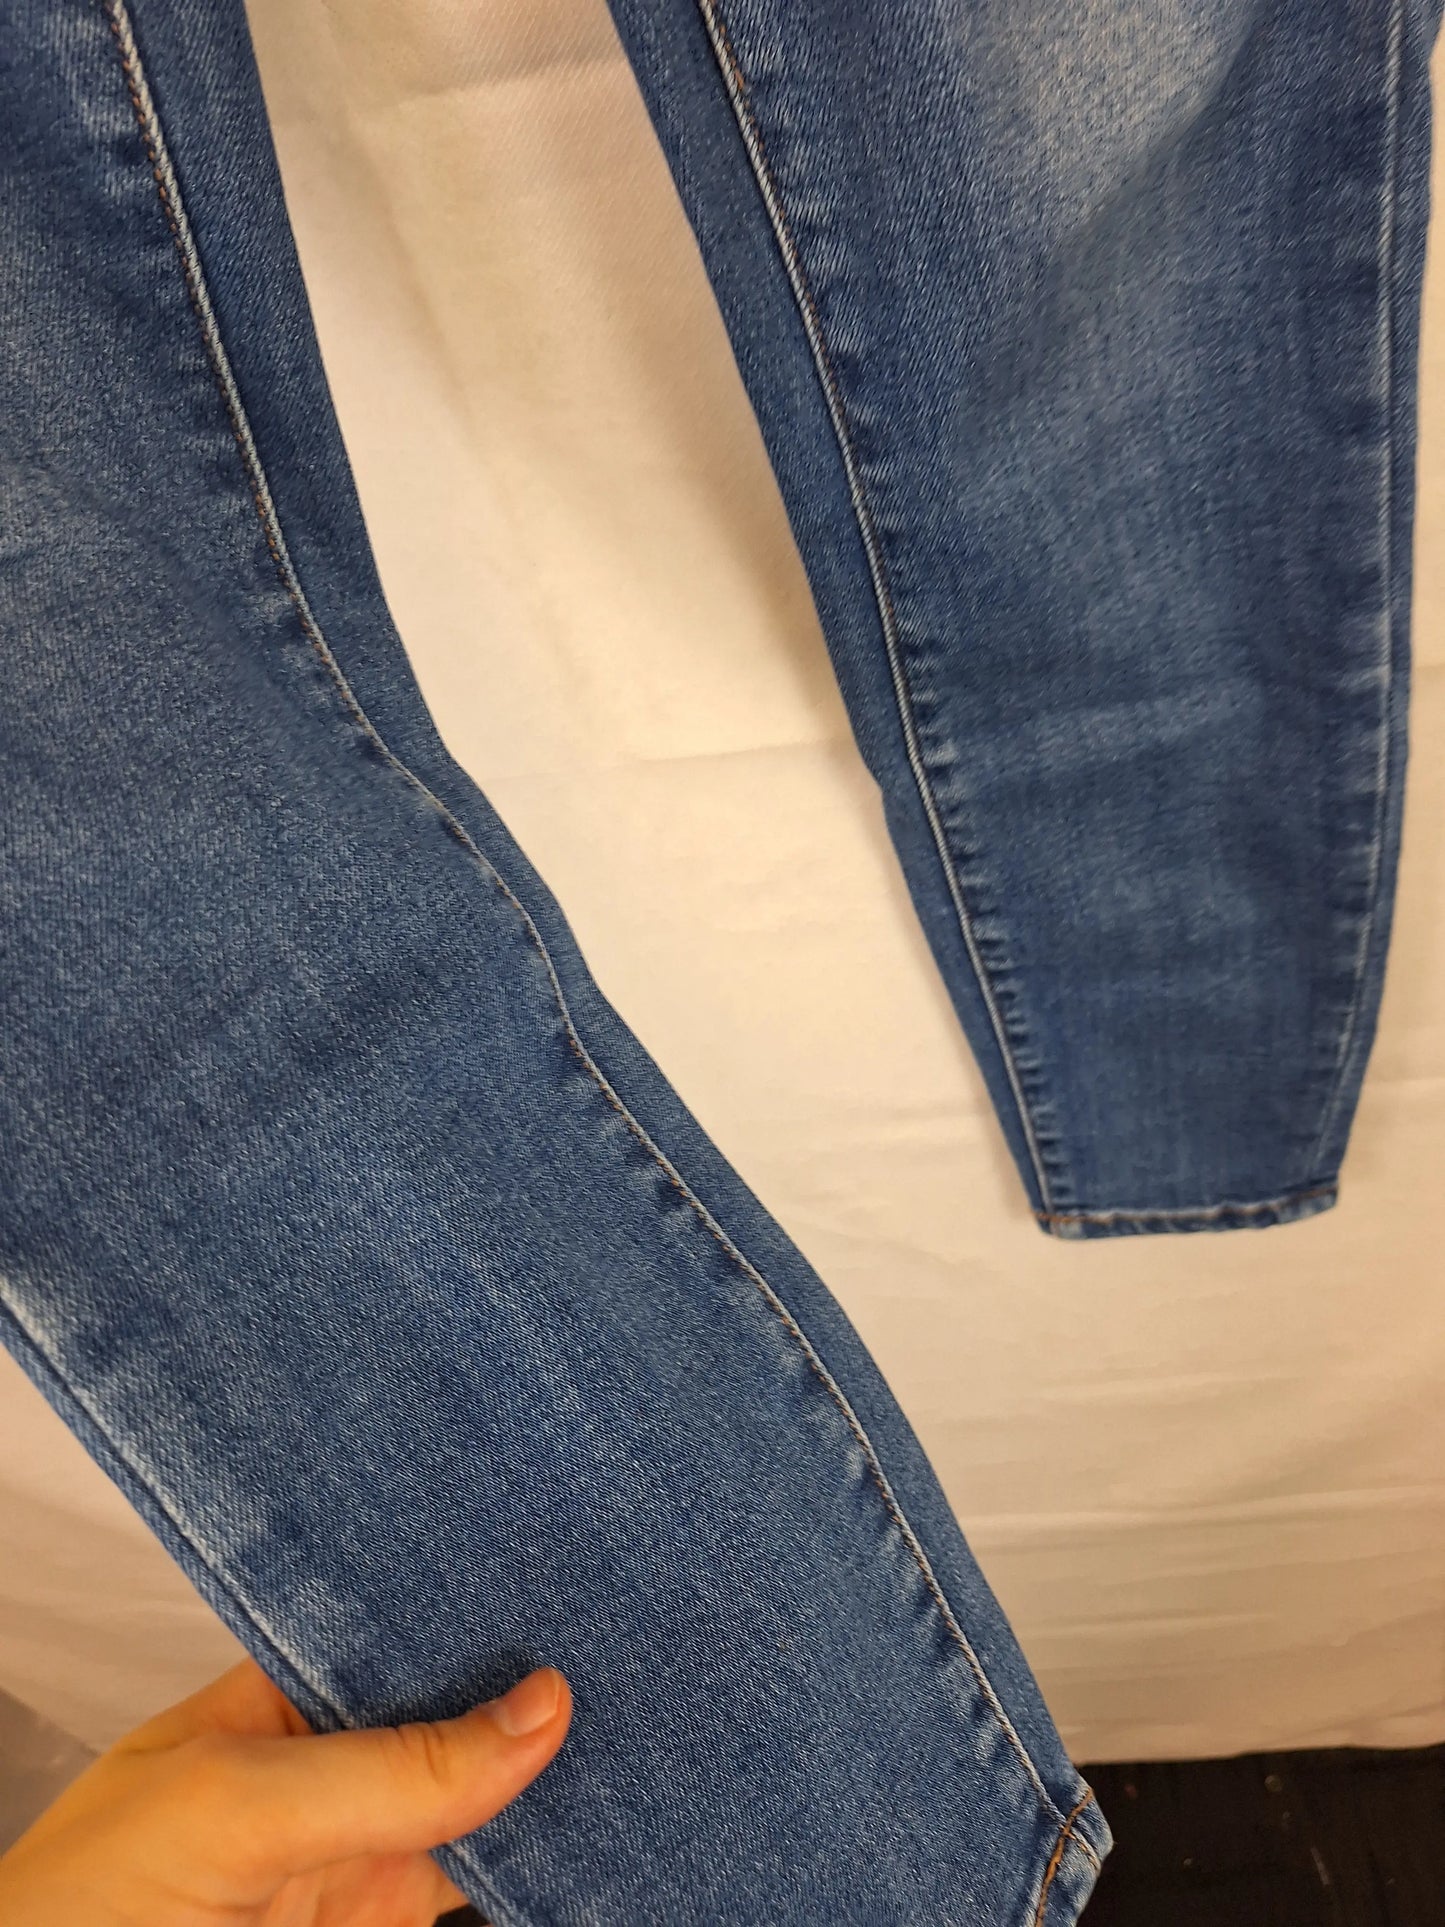 Decjuba Mid Blue Denim Skinny Jeans Size 10 by SwapUp-Online Second Hand Store-Online Thrift Store